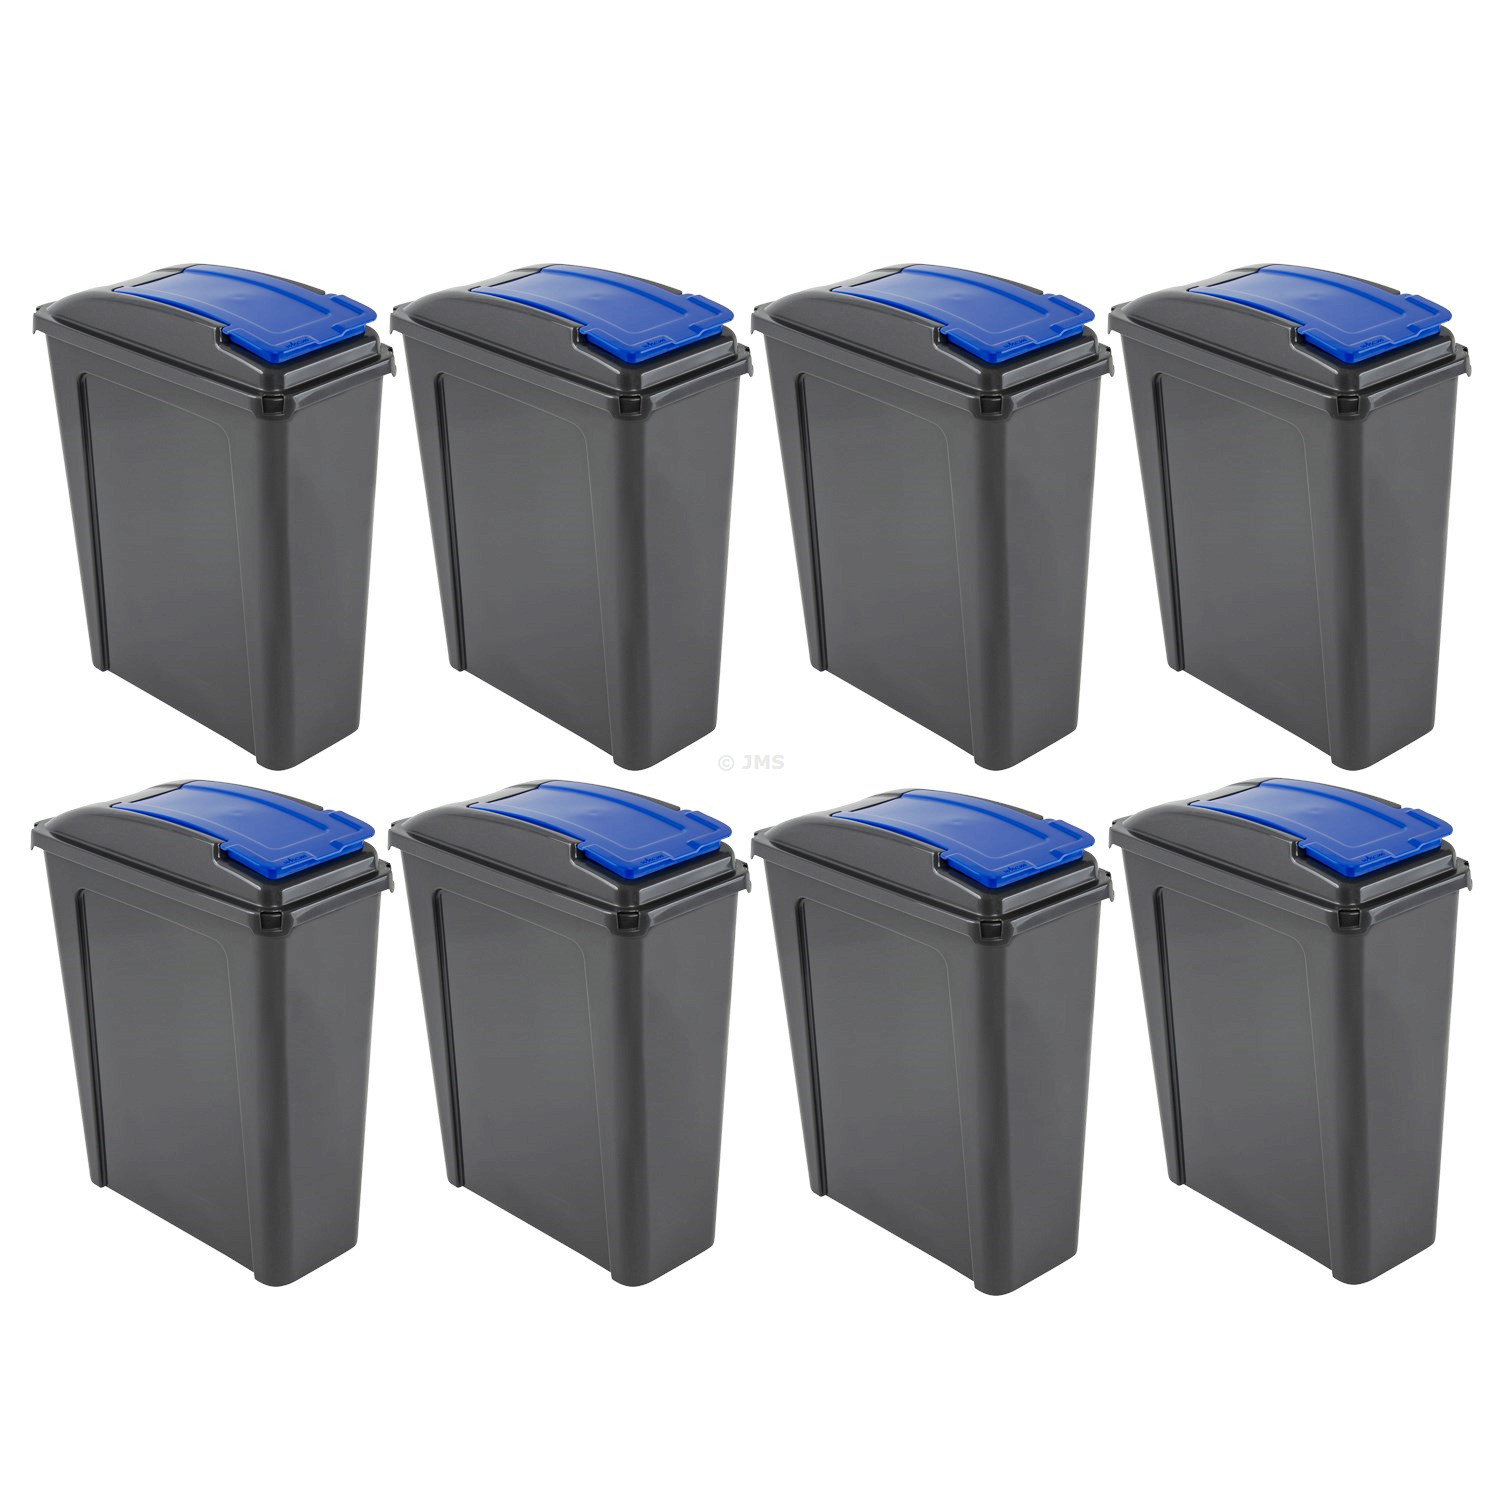 [Set of 8] Plastic Recycle Recycling Waste Dustbin 25L Slimline Bin with Blue Flap Lid Multi-purpose Storage Container Home Kitchen Garden